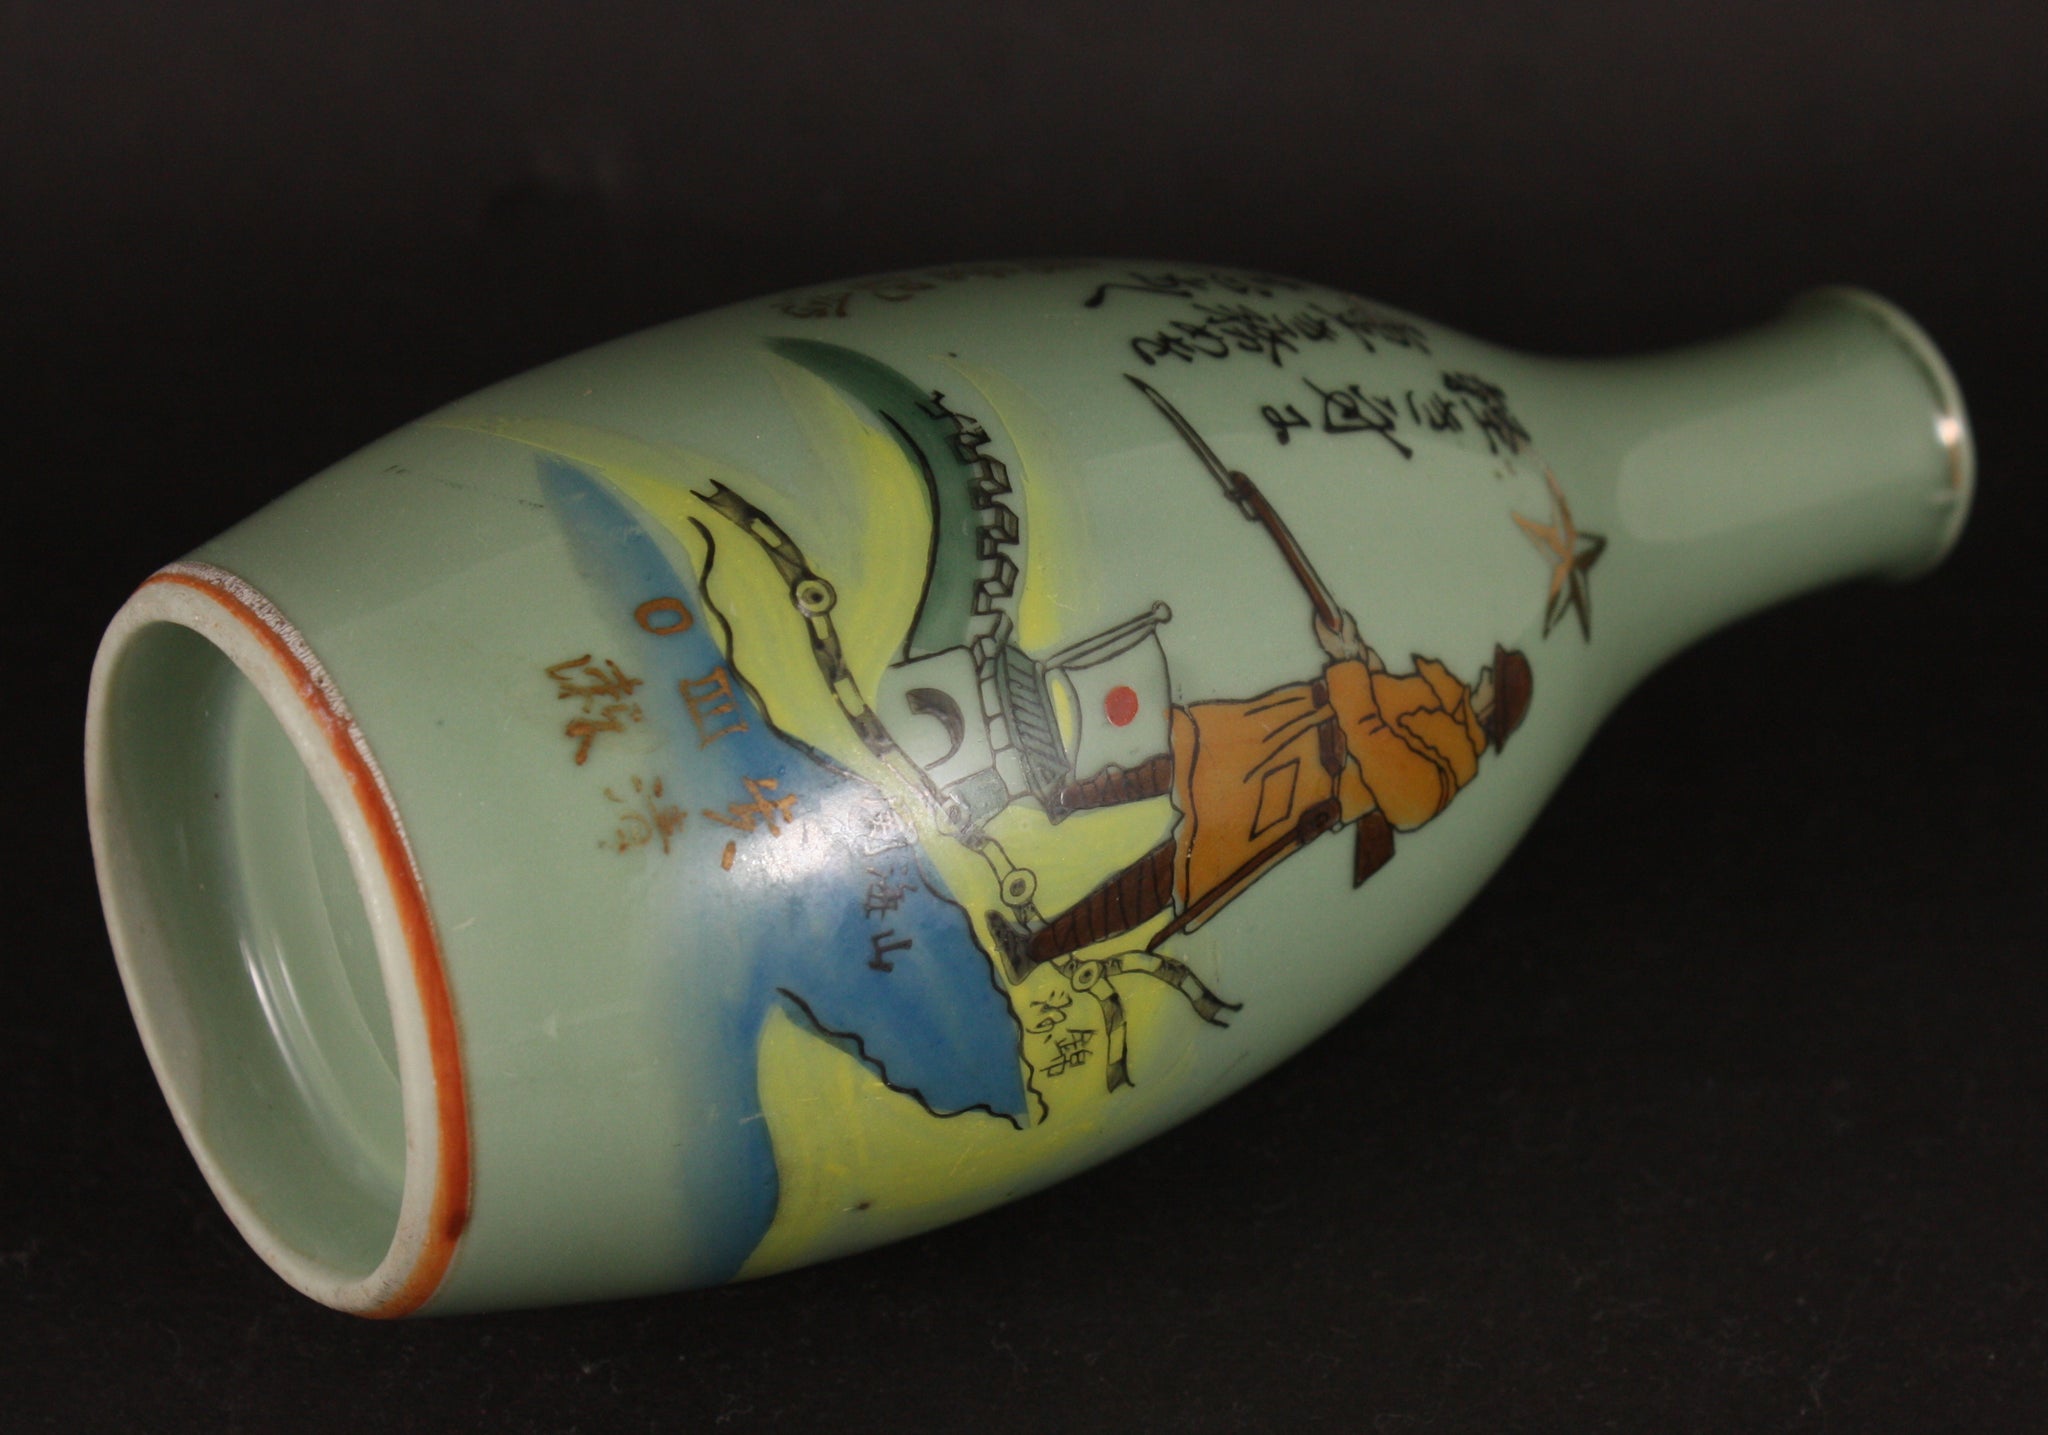 Antique Japanese Military Soldier Northeast China Army Sake Bottle